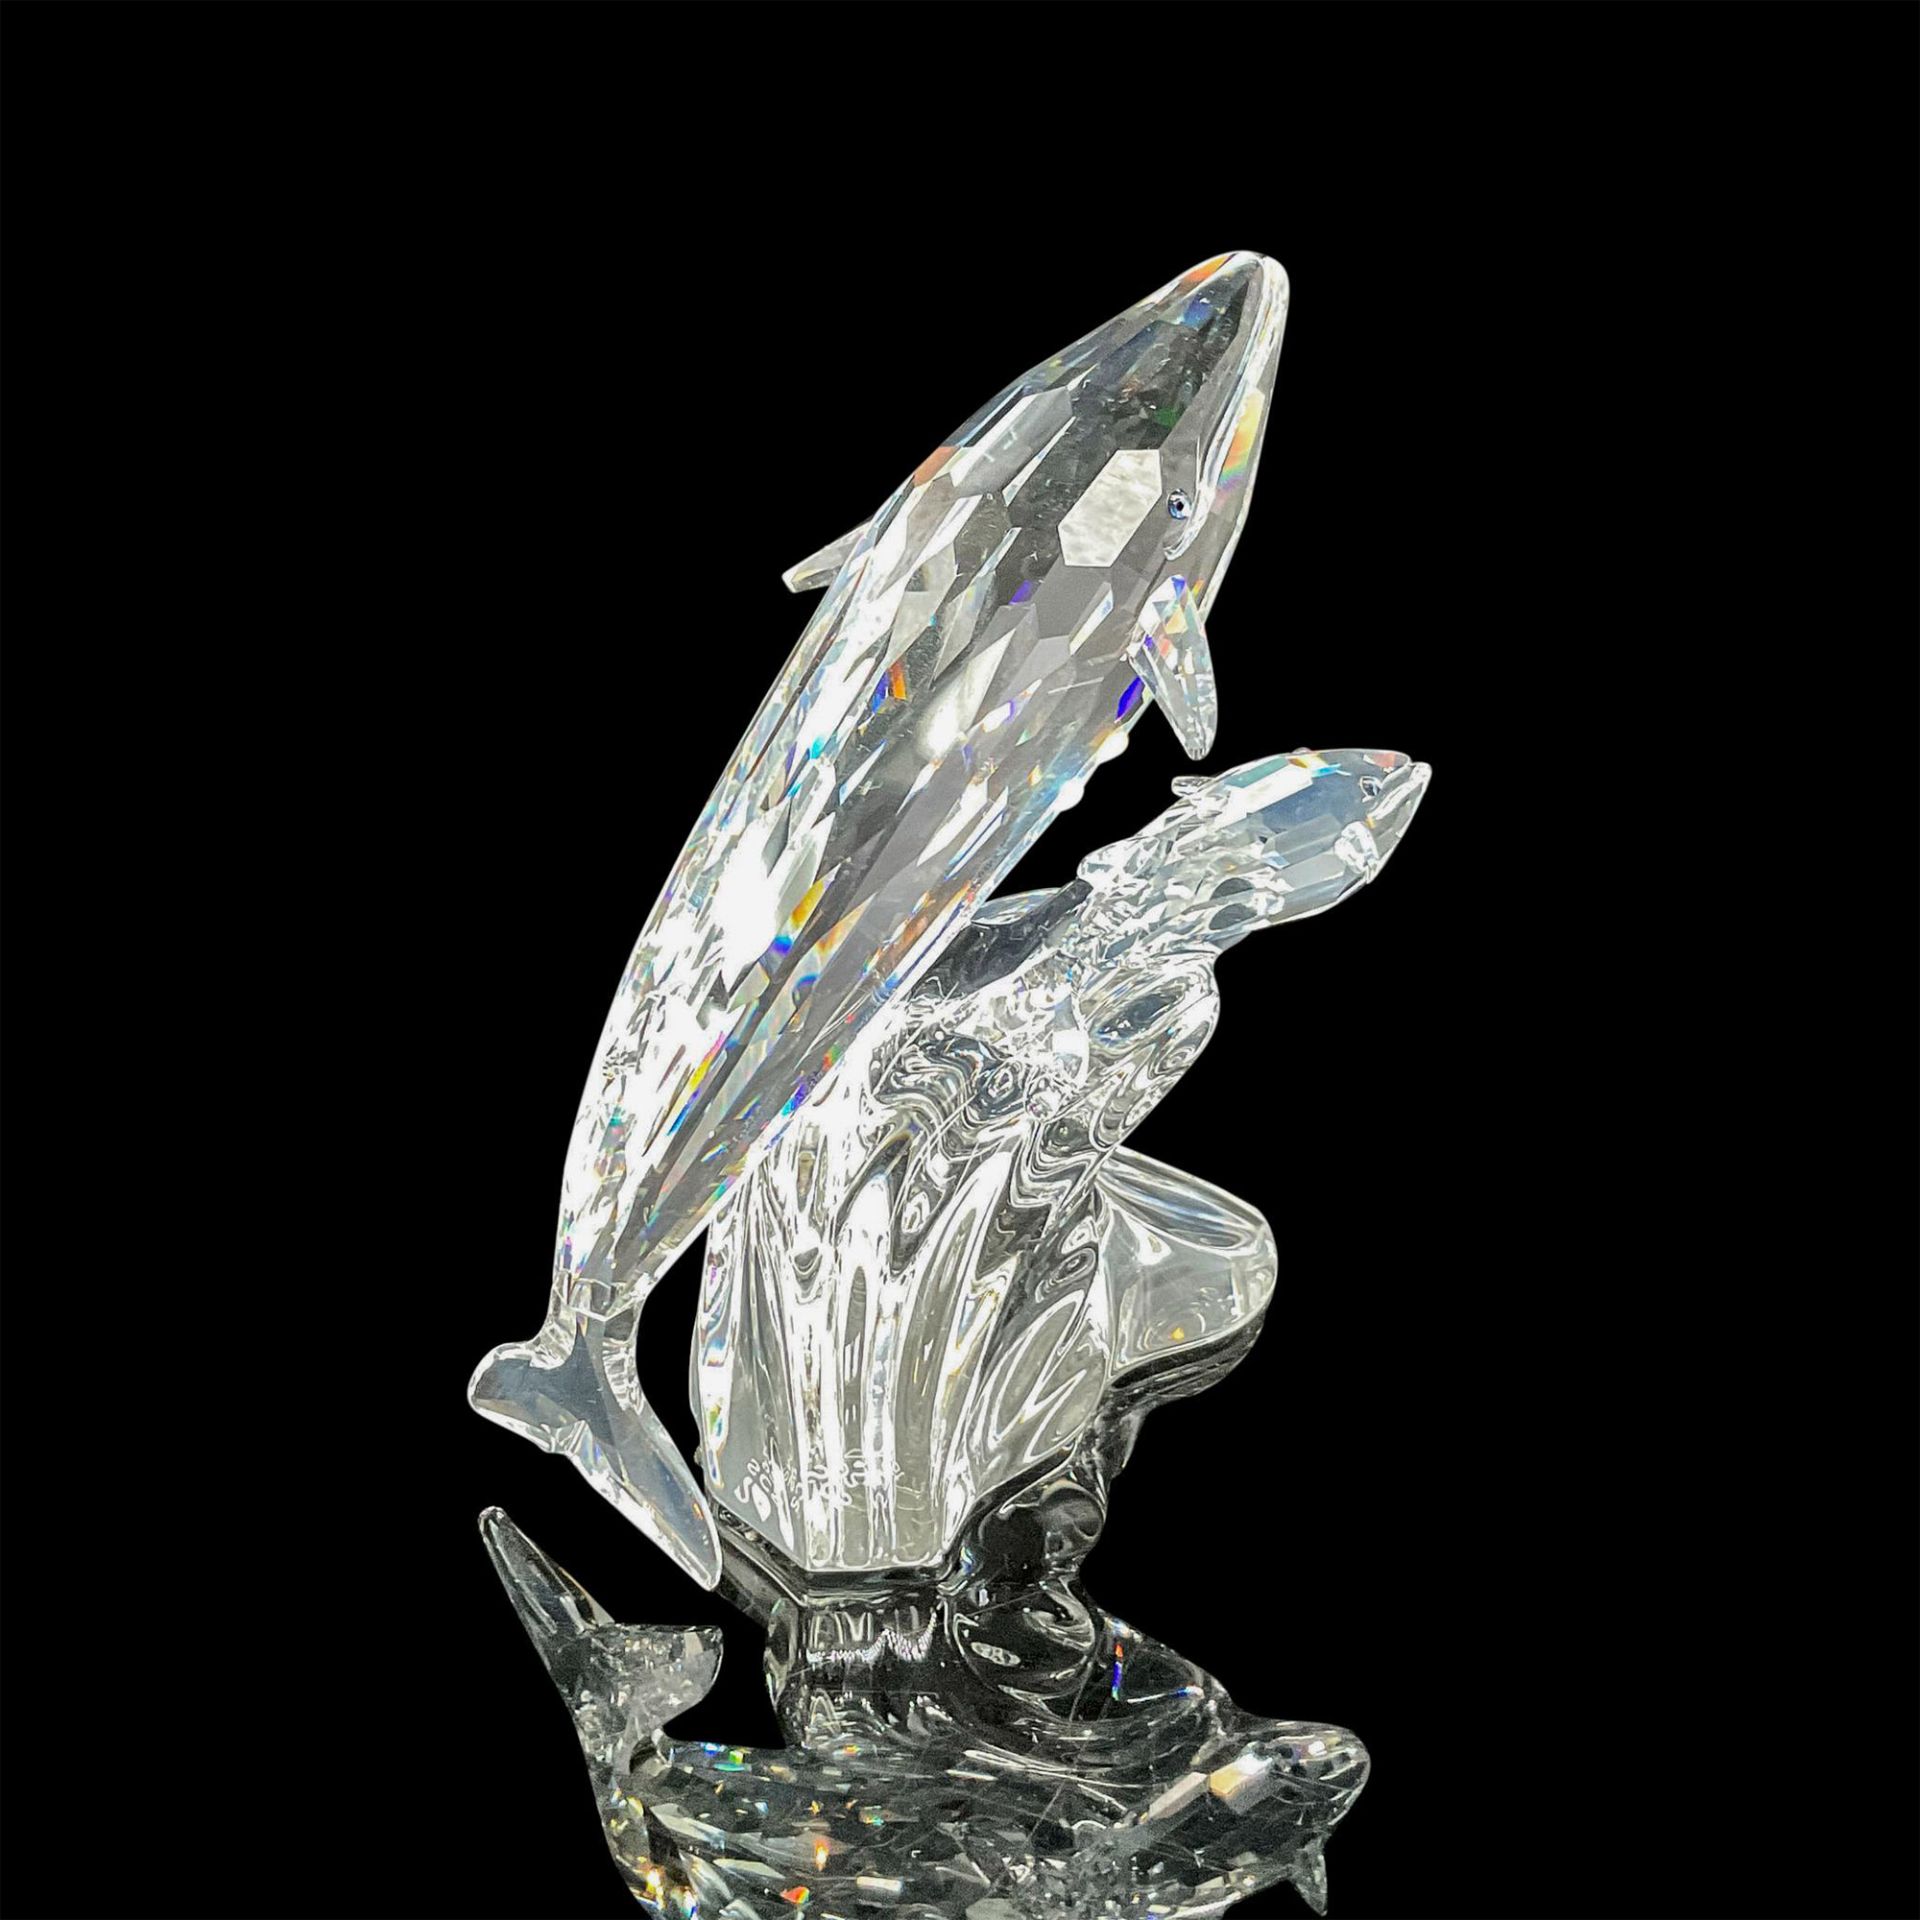 Swarovski Crystal Society Figurine, Care for Me The Whales - Image 2 of 4